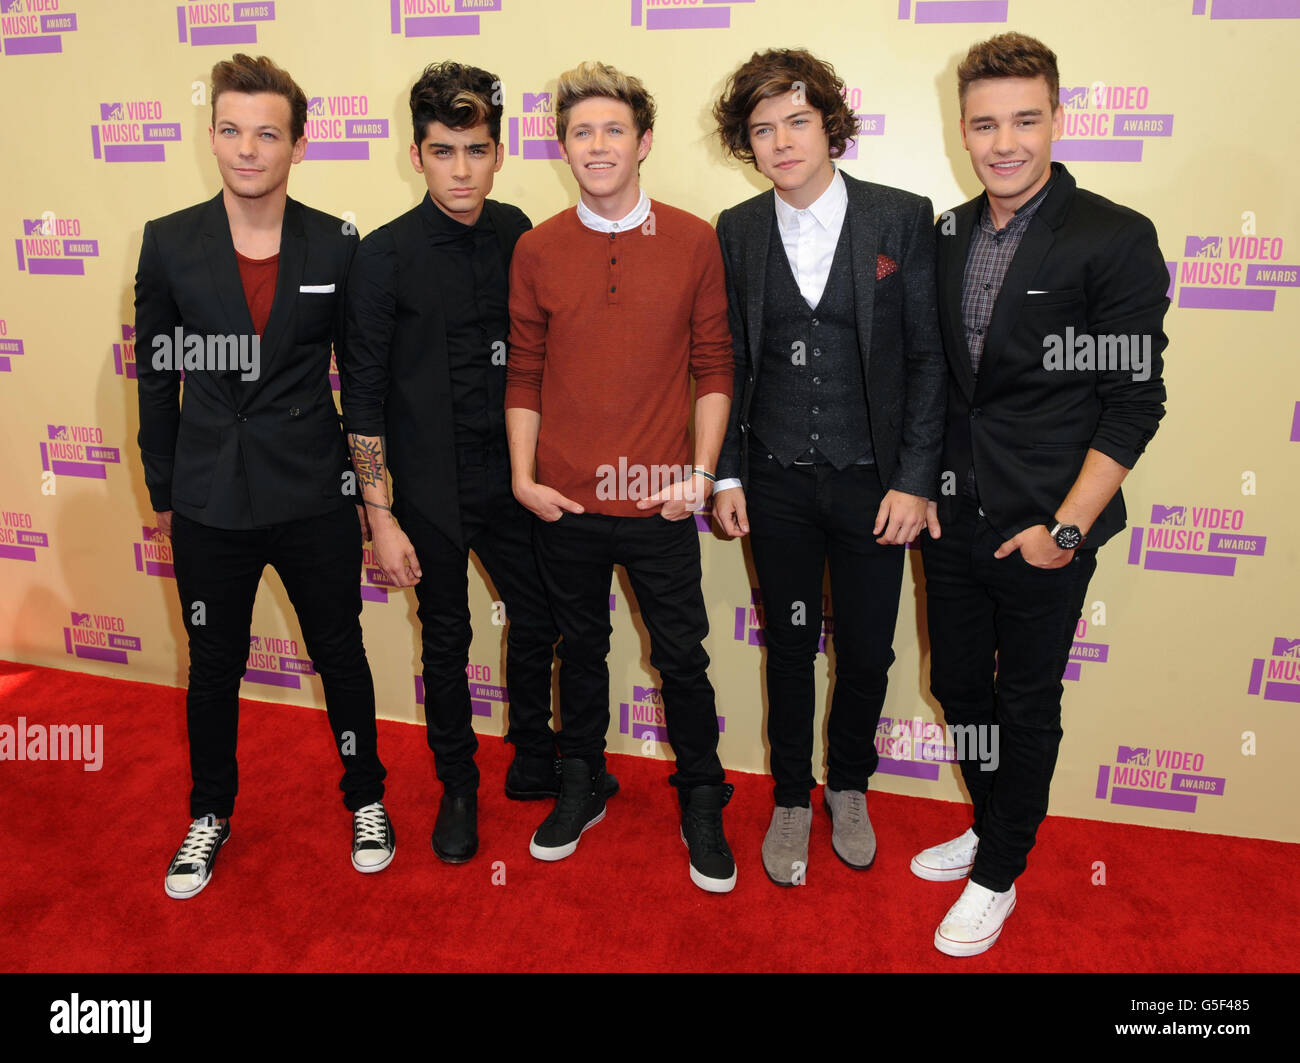 MTV Video Music Awards 2012 - Arrivals - Los Angeles. One Direction arriving at the MTV Video Music Awards at the Staples Centre, Los Angeles. Stock Photo